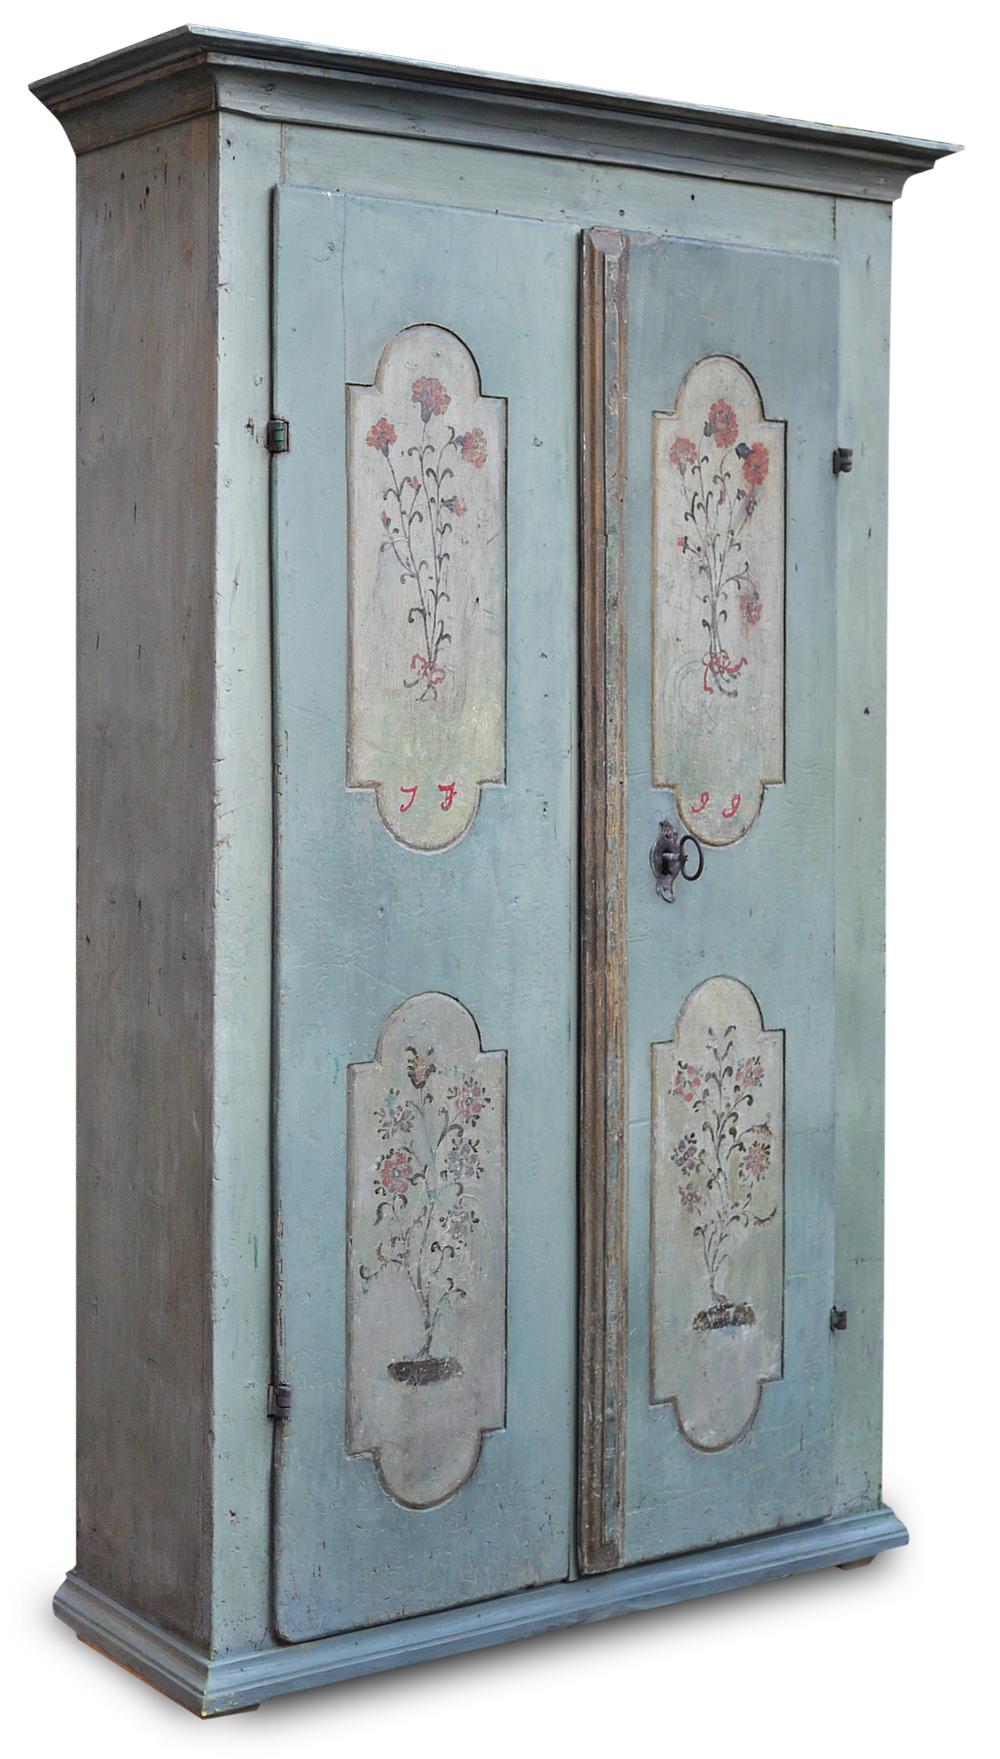 Painted wardrobe, dated 1799

Measures: H. 177cm, L. 93cm (107cm to the frames), P. 34cm (40cm to the frames)

Tyrolean painted wardrobe with two doors, entirely painted in light aquamarine. On the doors there are frames with floral motifs.